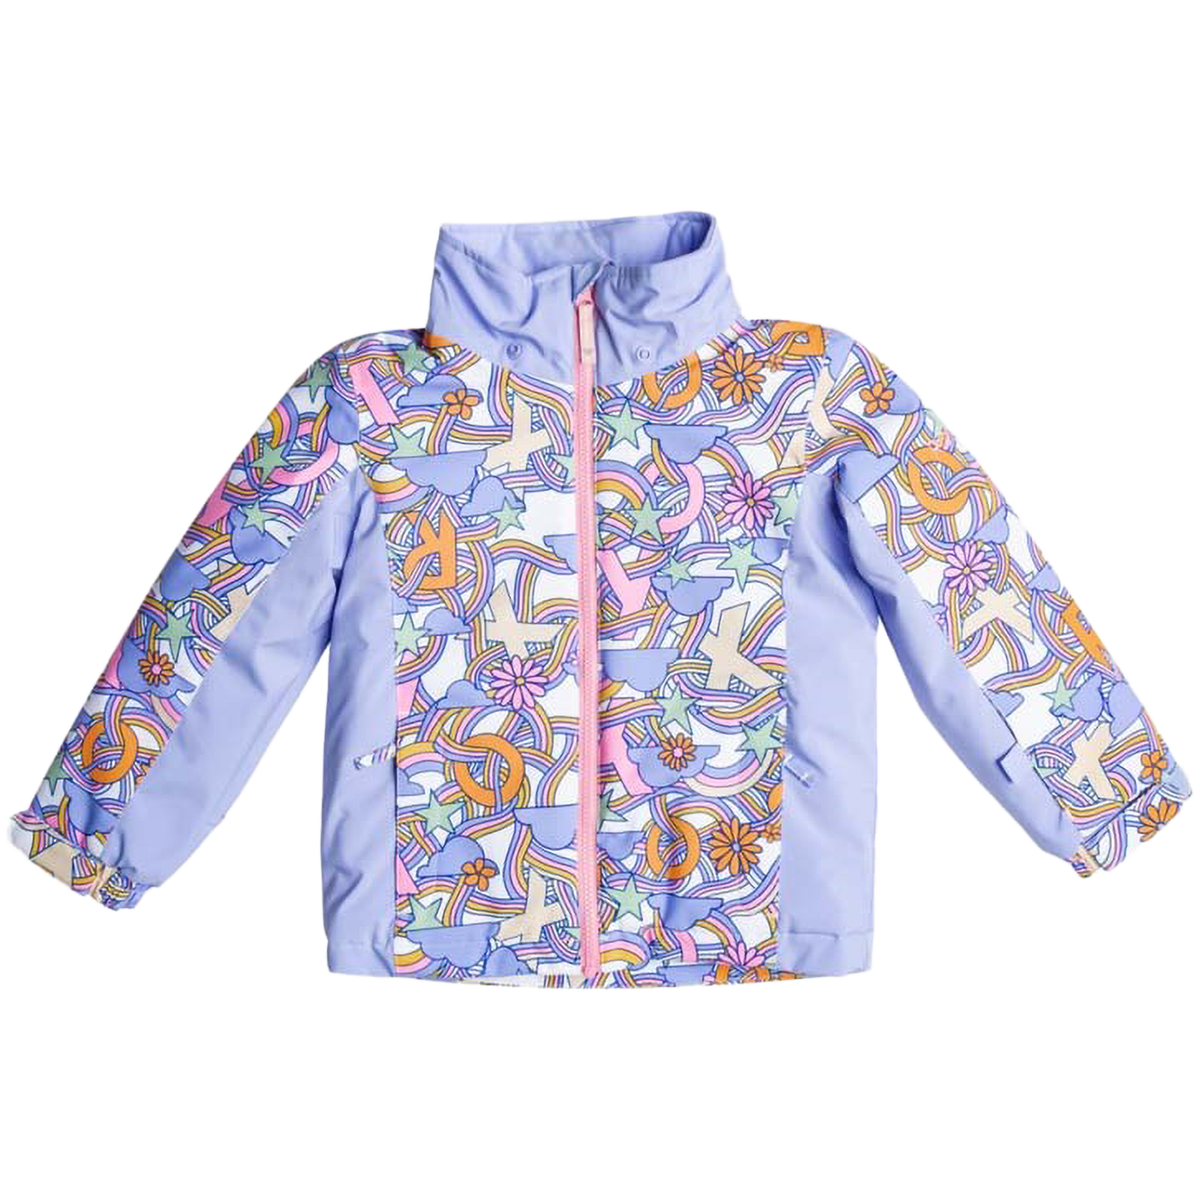 Youth Snowy Tale Girls Insulated Jacket alternate view